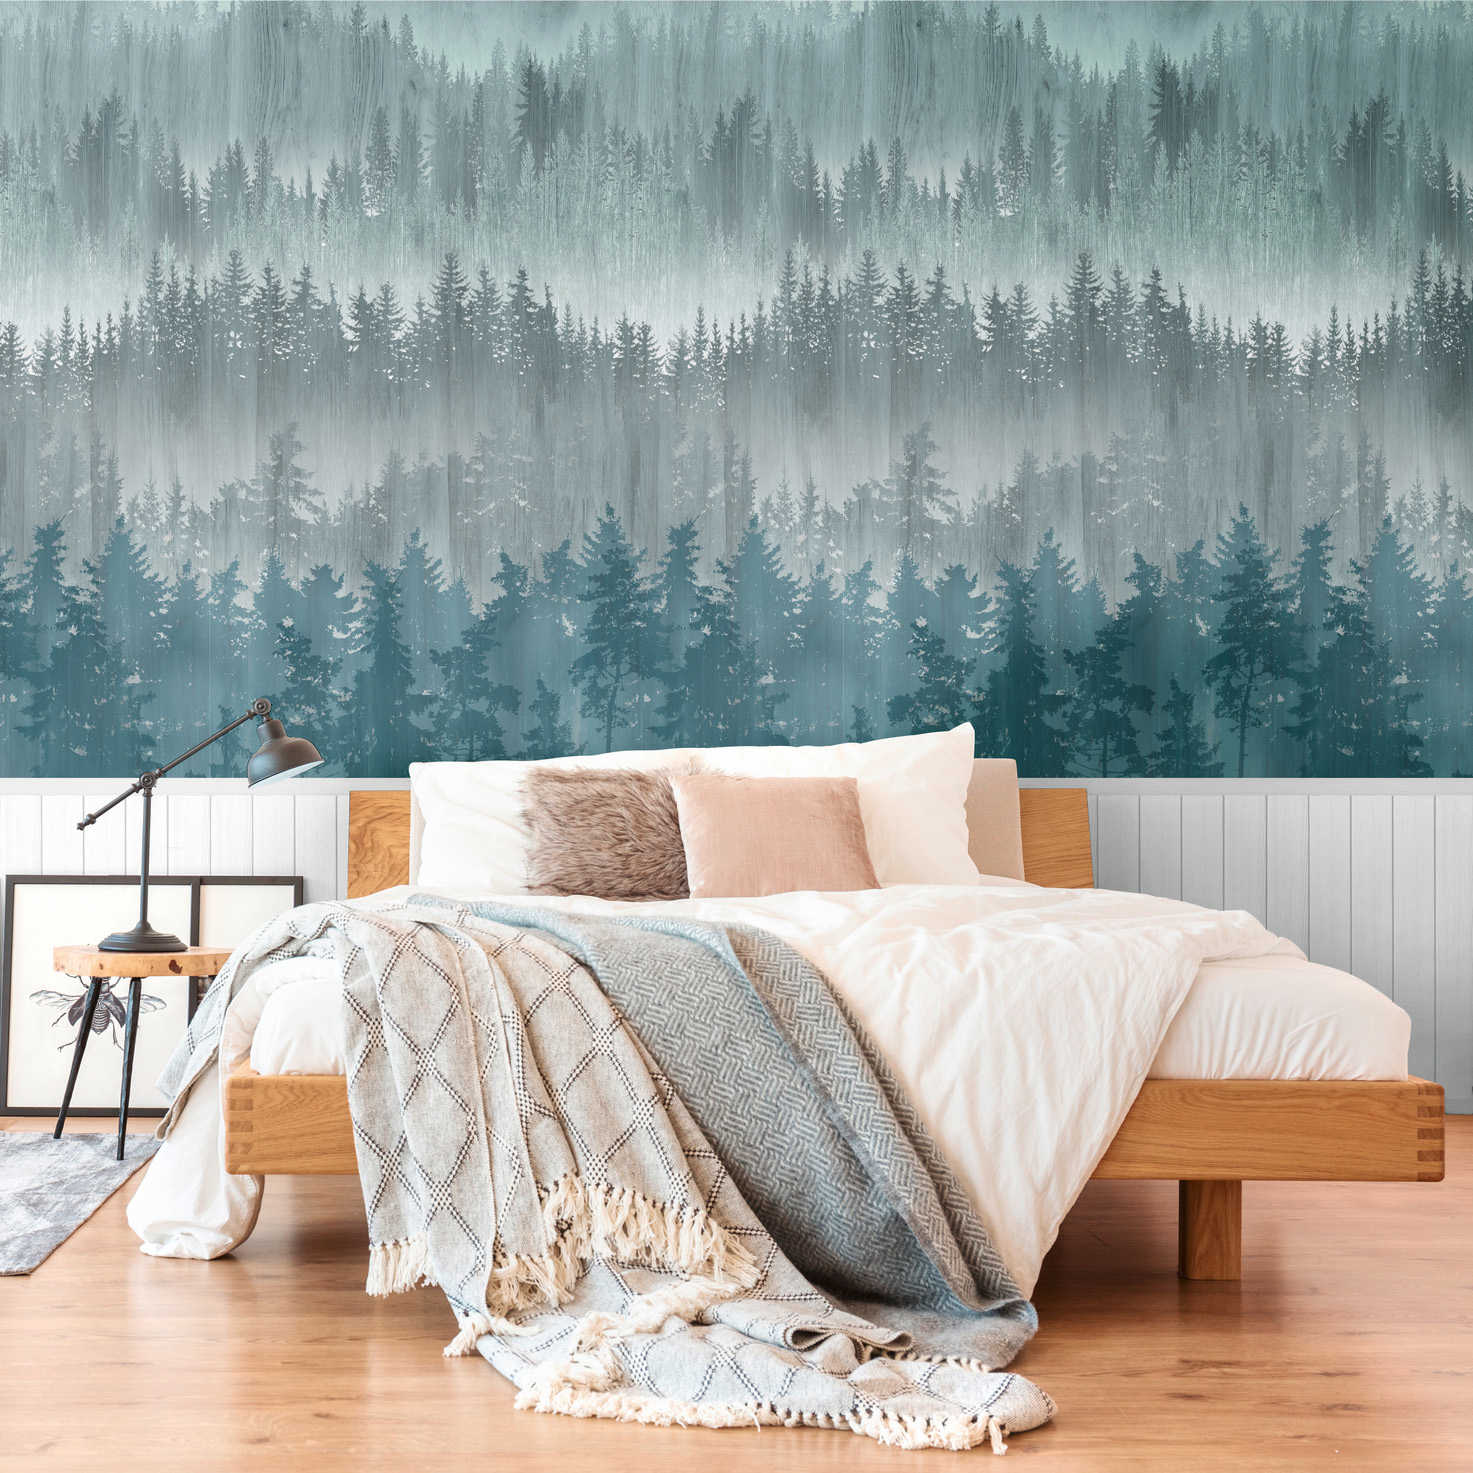 Non-woven motif wallpaper with wood-effect plinth border and forest pattern - white, turquoise
